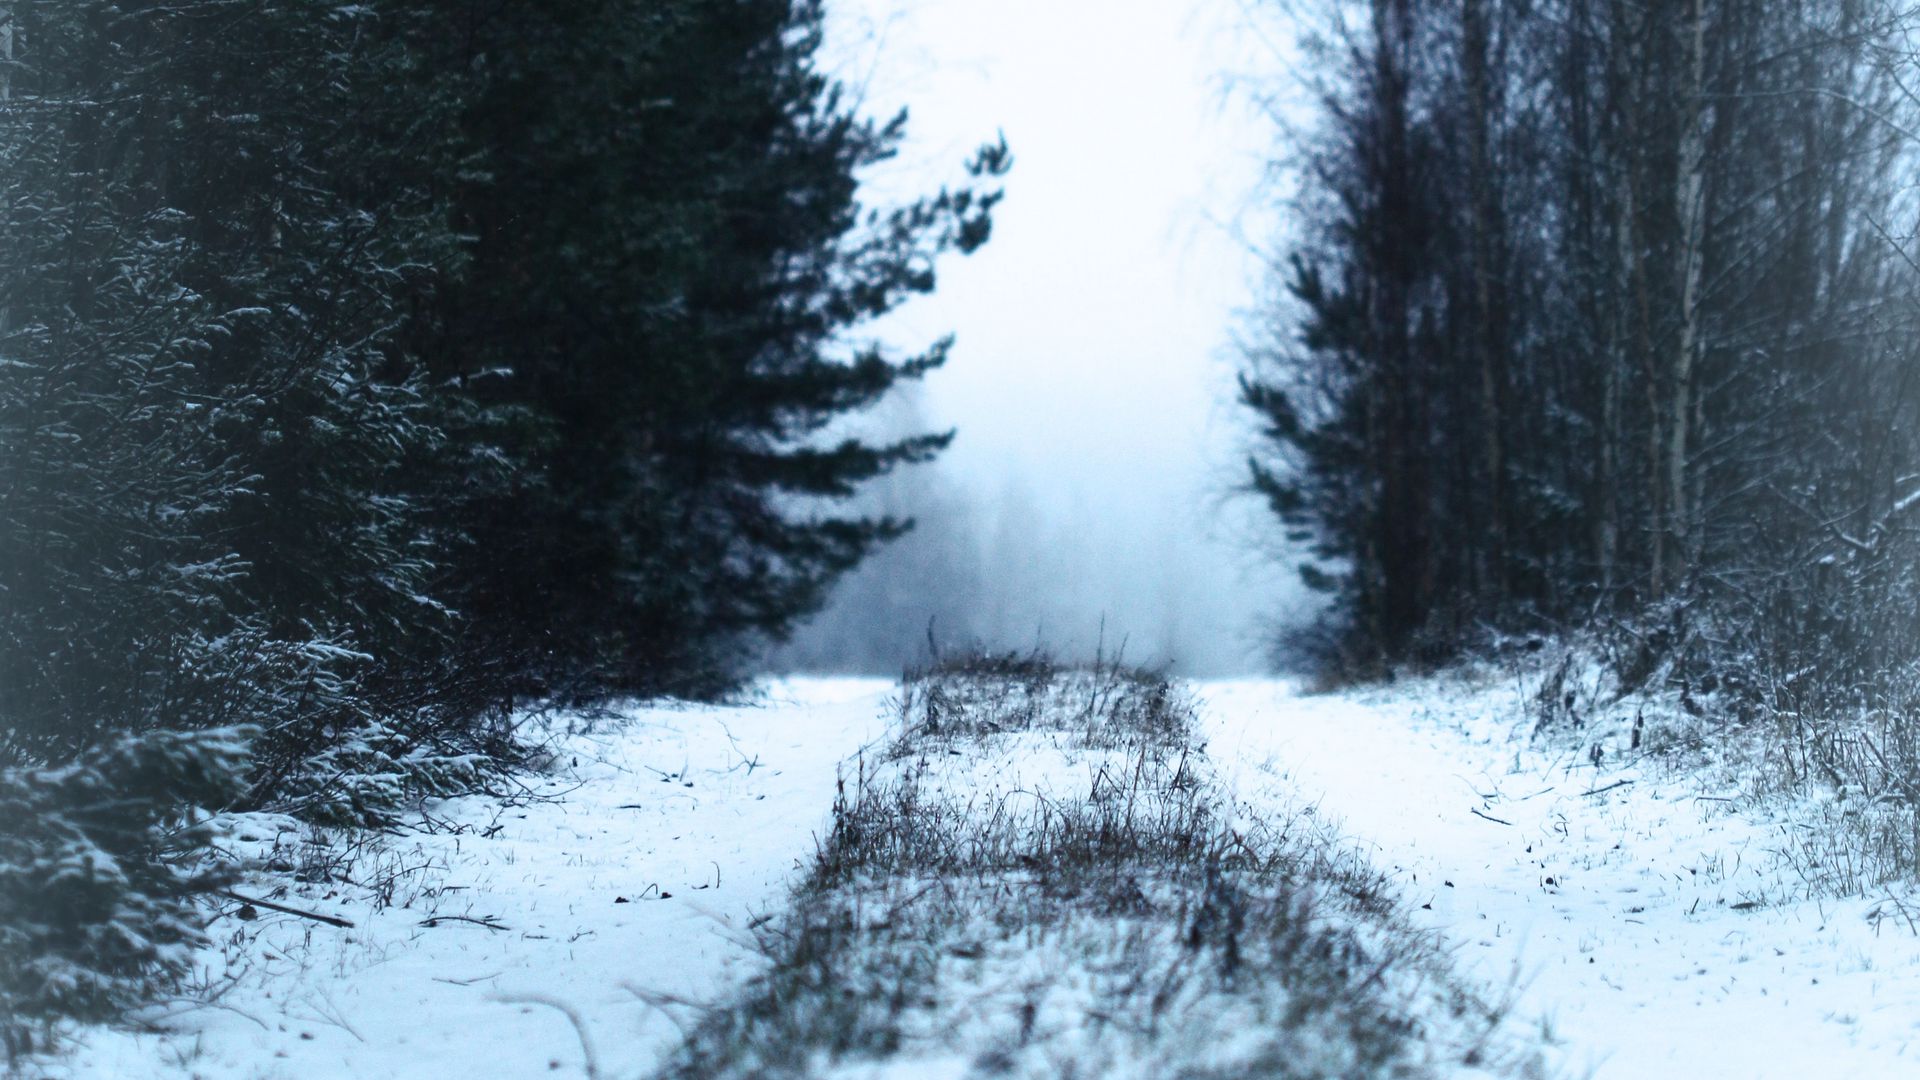 Download wallpaper 1920x1080 path, forest, snow, fog, winter full hd, hdtv, fhd, 1080p HD background